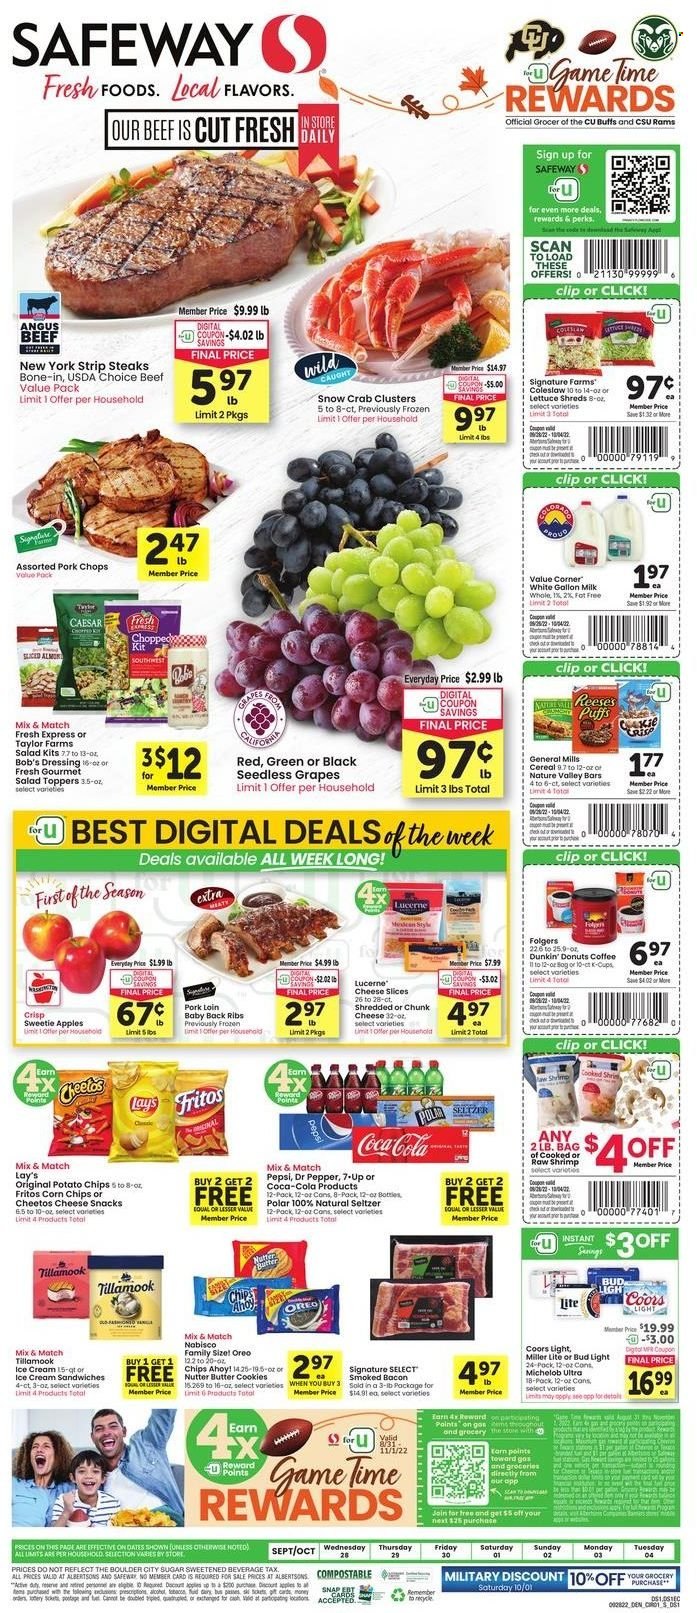 thumbnail - Safeway Flyer - 09/28/2022 - 10/04/2022 - Sales products - puffs, Dunkin' Donuts, lettuce, salad, apples, grapes, seedless grapes, beef meat, steak, striploin steak, pork chops, pork loin, pork meat, pork ribs, pork back ribs, crab, shrimps, coleslaw, bacon, sliced cheese, chunk cheese, Oreo, milk, ice cream, ice cream sandwich, Reese's, cookies, butter cookies, snack, Chips Ahoy!, Fritos, potato chips, Cheetos, Lay’s, corn chips, sugar, cereals, Nature Valley, dressing, Coca-Cola, Pepsi, Dr. Pepper, 7UP, seltzer water, coffee, Folgers, beer, Bud Light, Signal, cup, doll, Miller Lite, Coors, Michelob. Page 1.